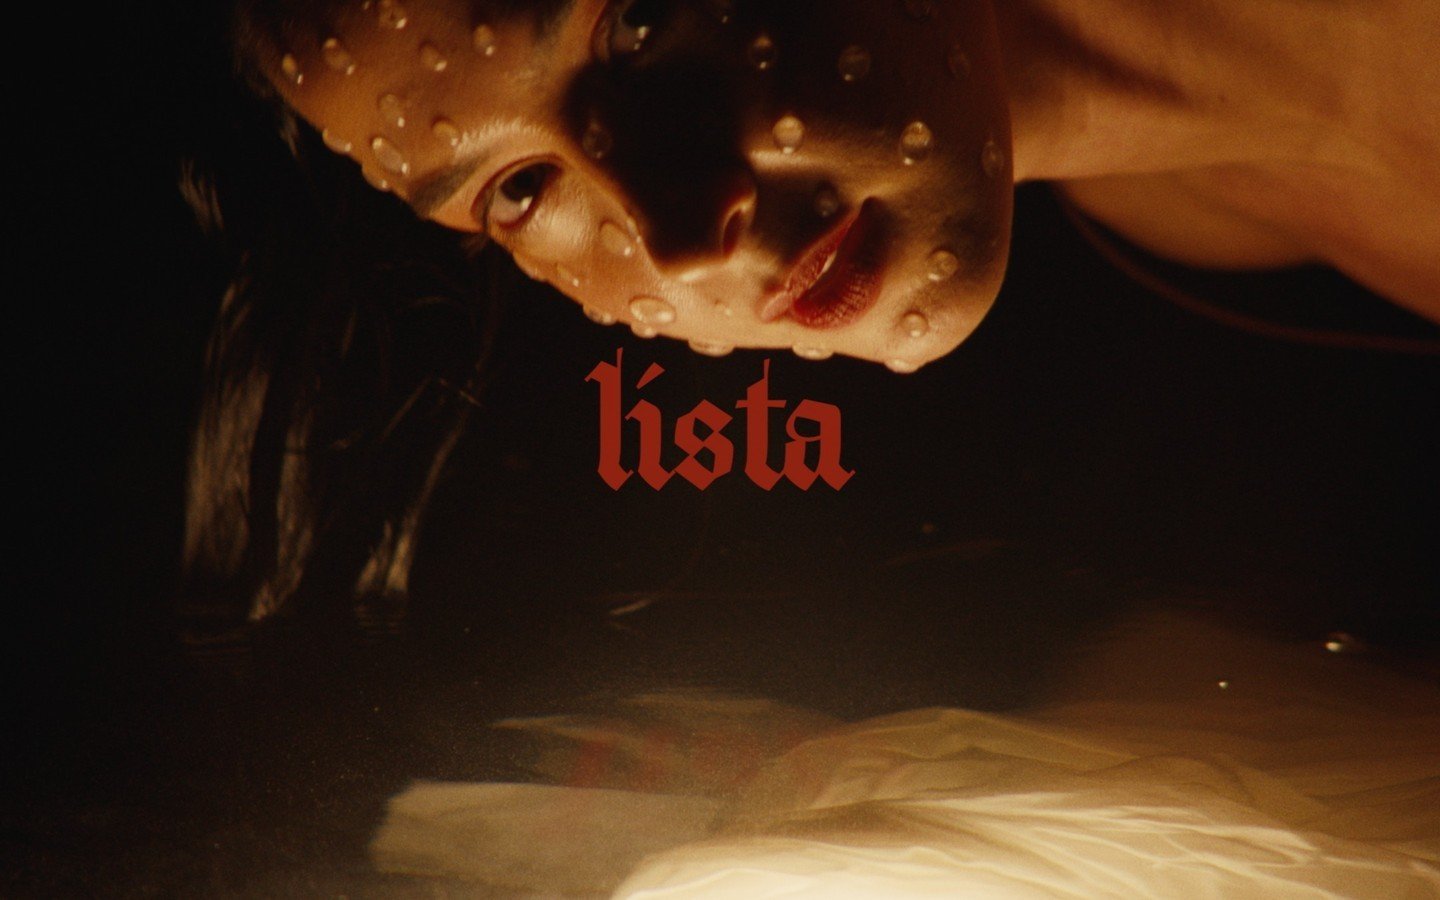 Lista is out! Directed by Bianca Poletti for Nikki Lorenzo. Starring John Hawkes.⁠
⁠
To bring her cinematic vision to life, Poletti collaborated with dancer and choreographer Matilda Sokomoto, expertly breaking down the film into three distinct dance